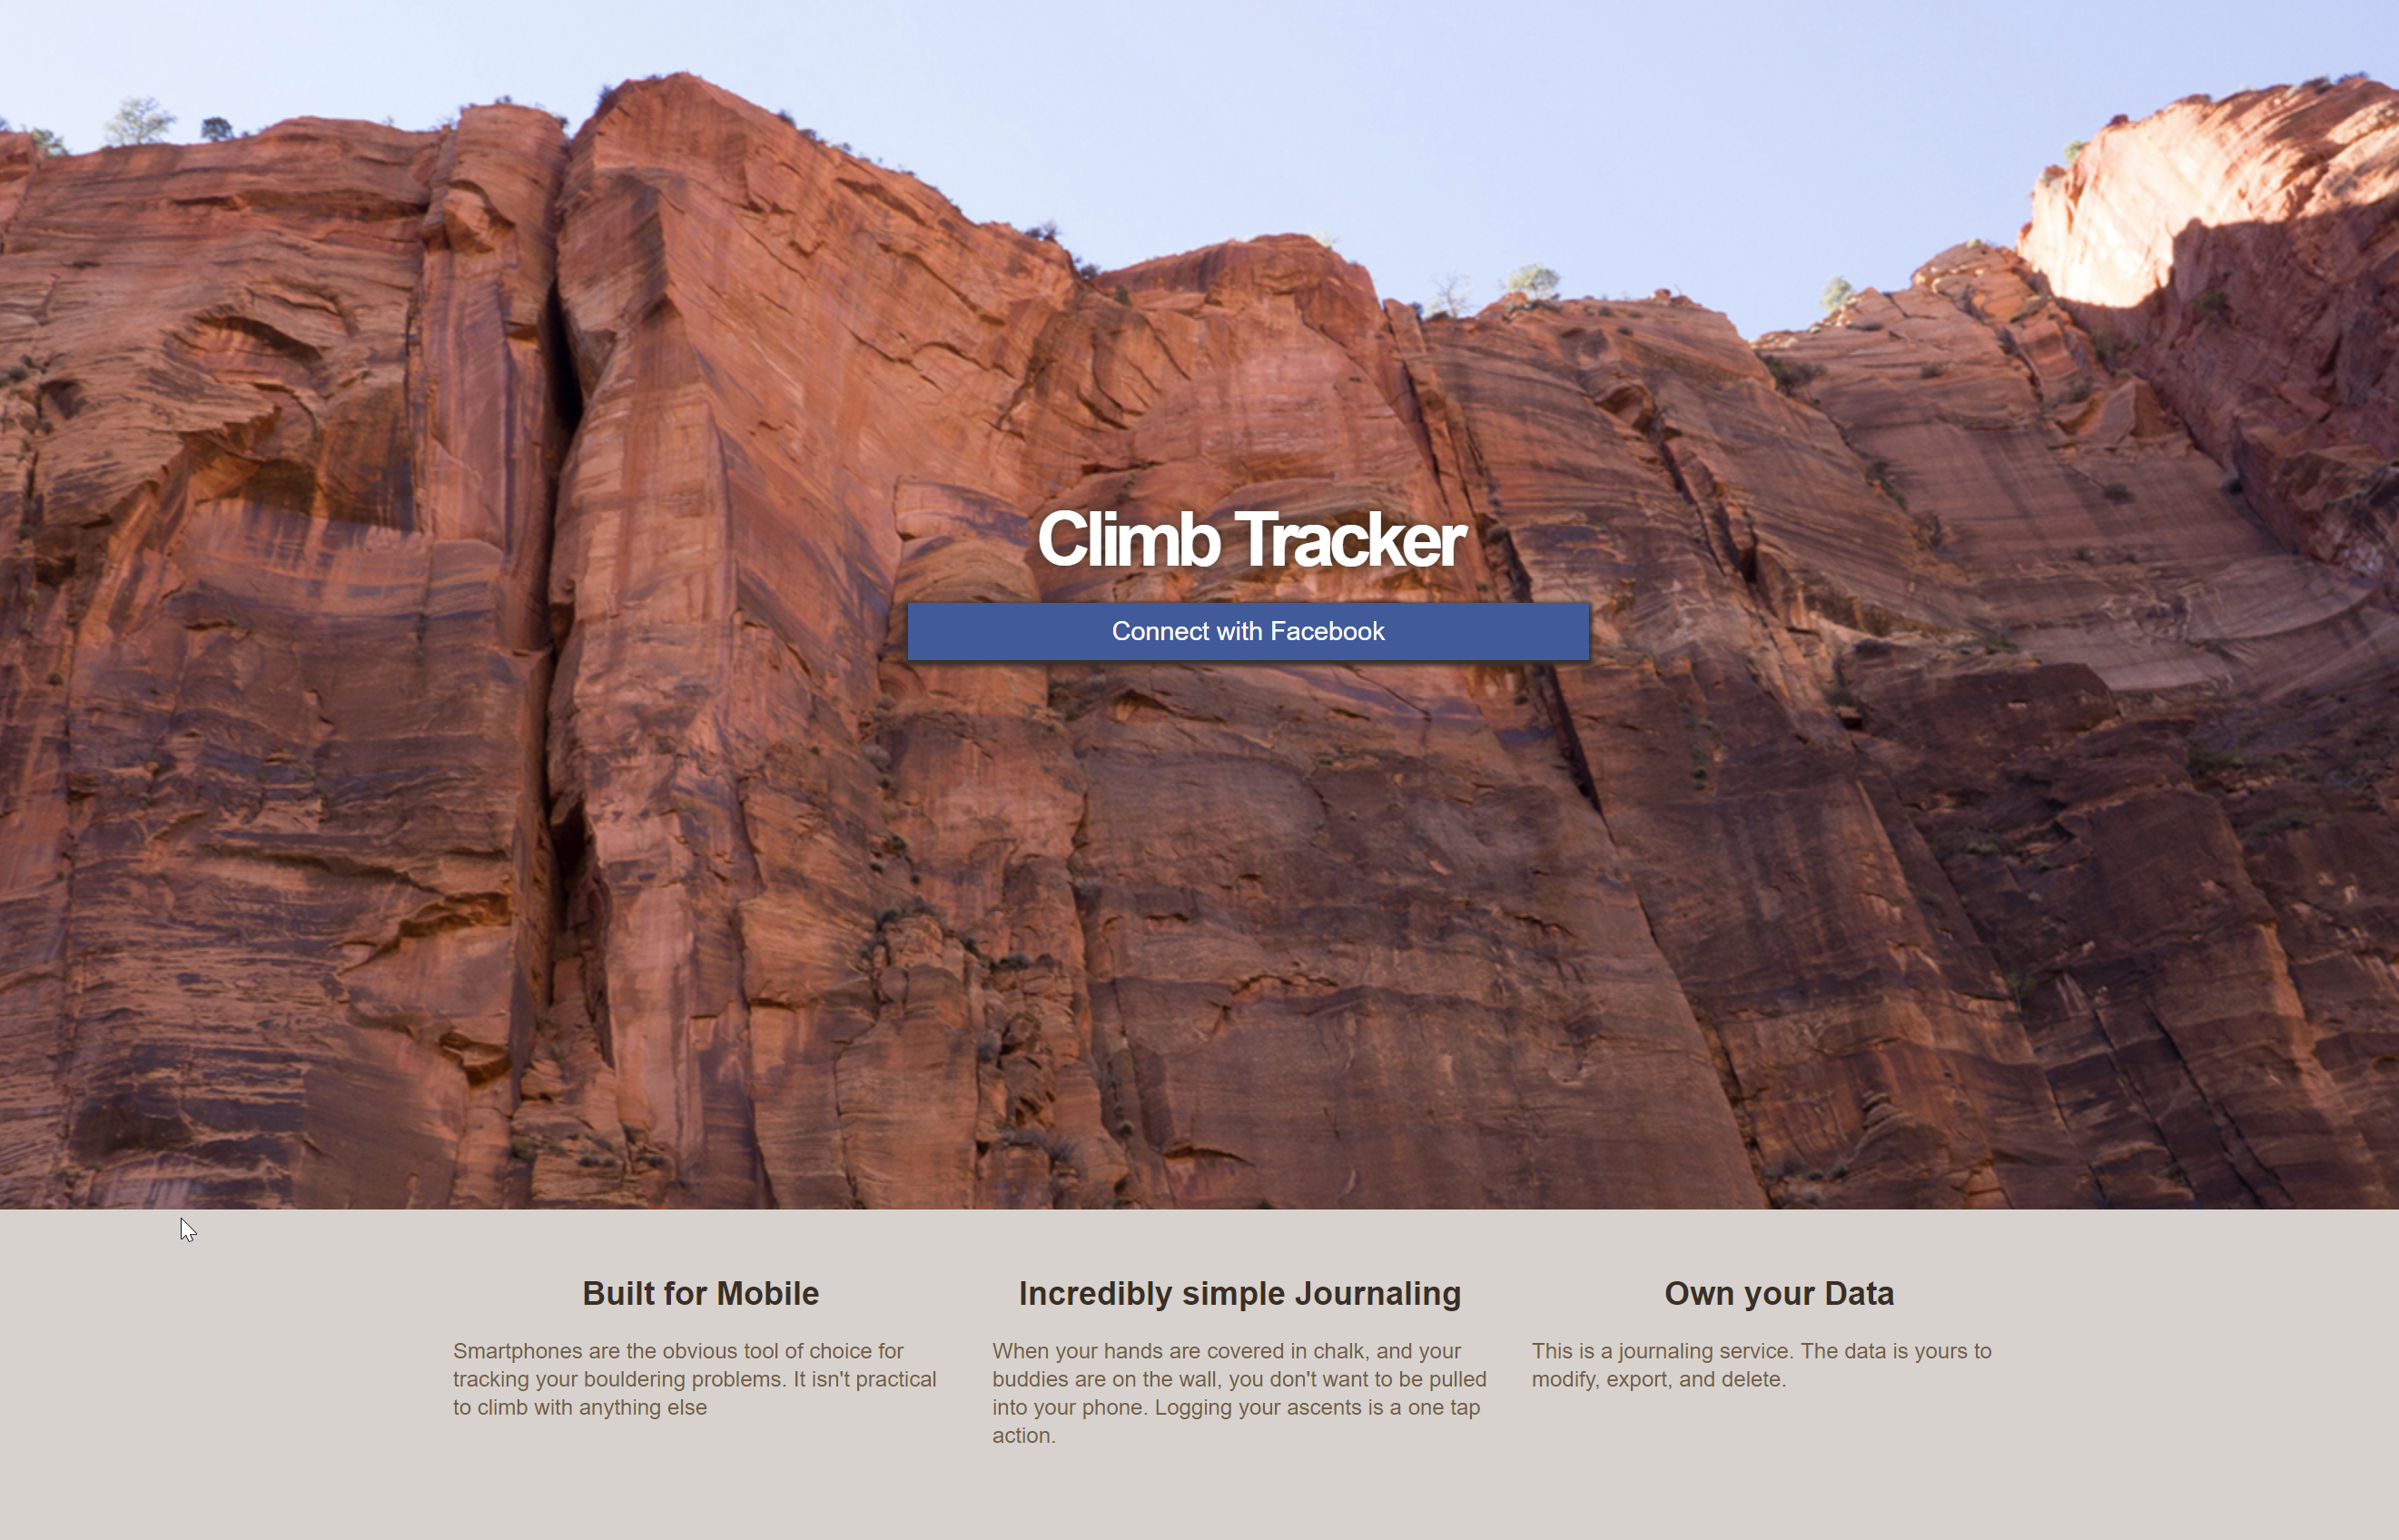 The landing page for the Climb Tracker app